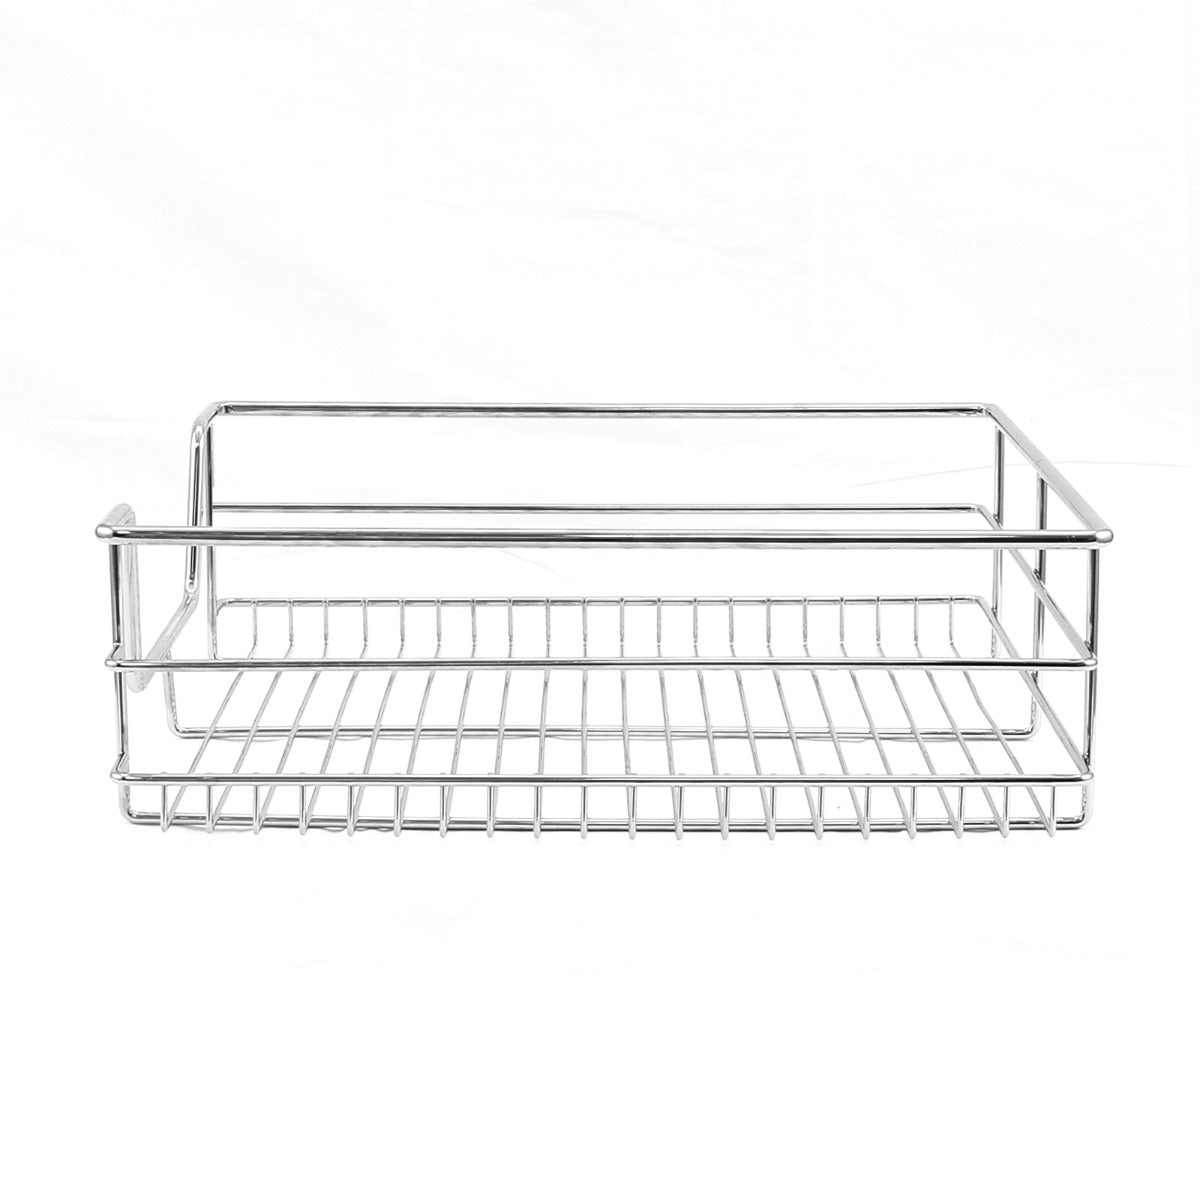 4 x KuKoo Kitchen Pull Out Storage Baskets – 400mm Wide Cabinet